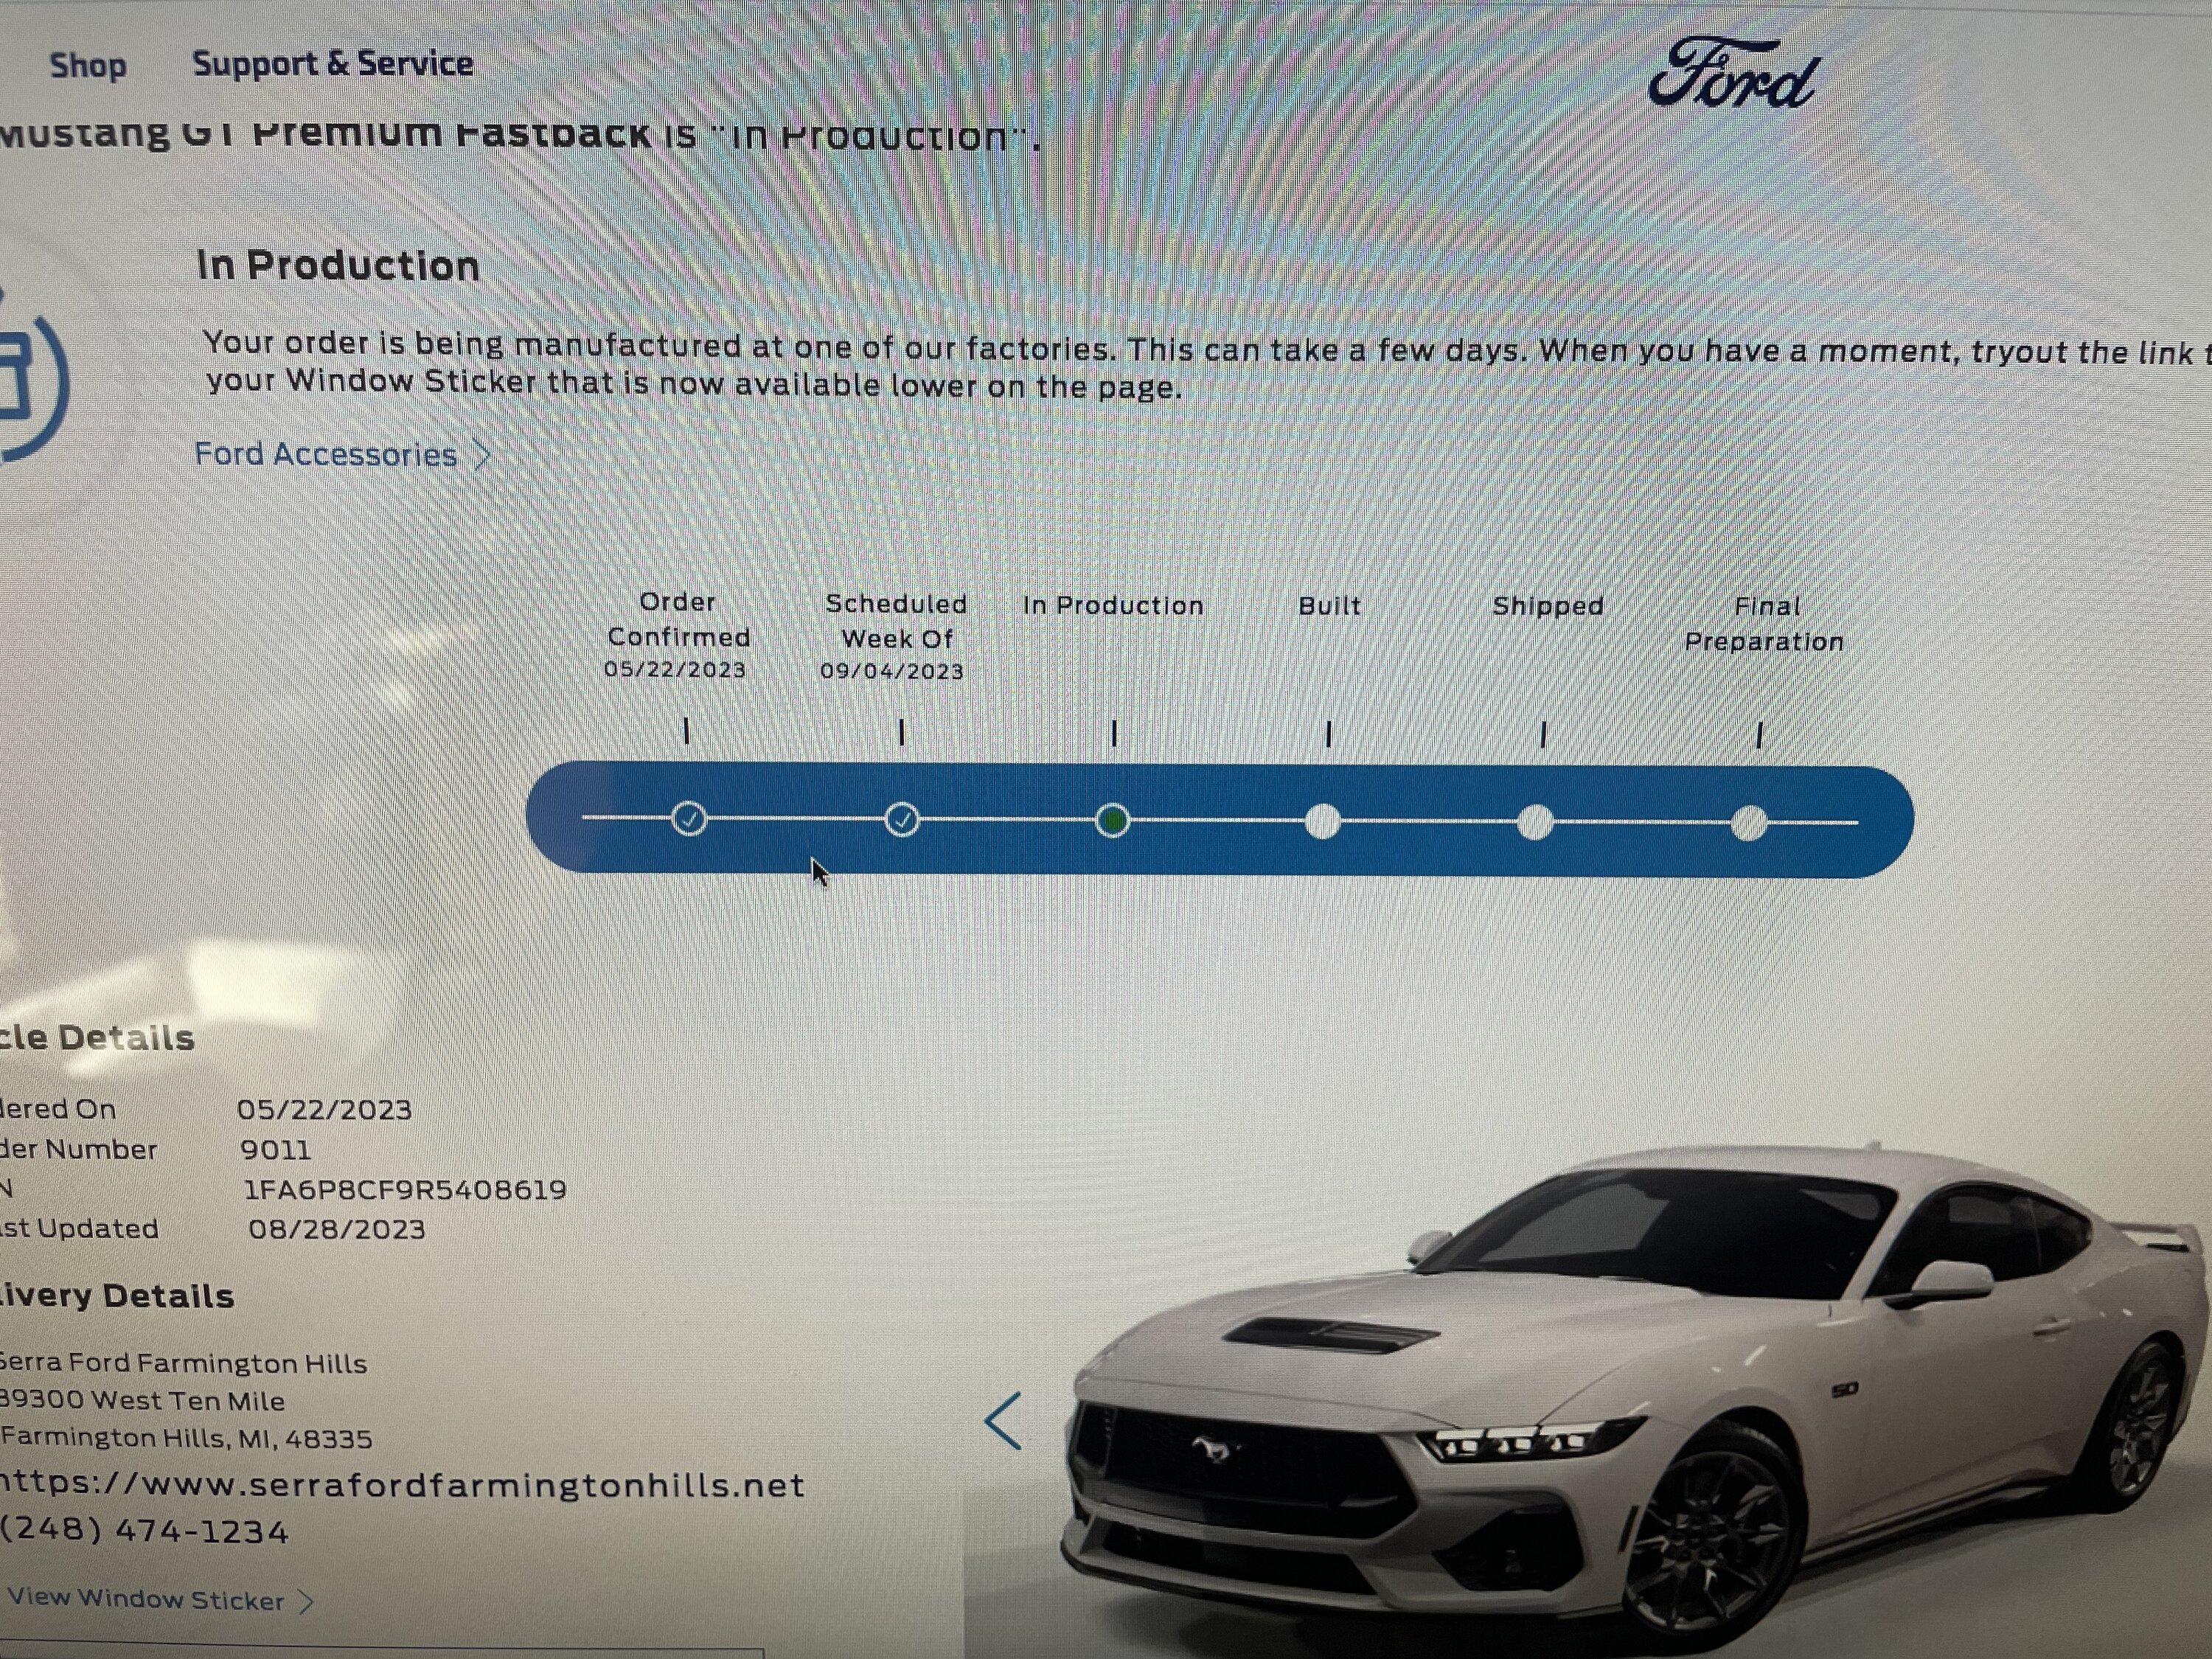 S650 Mustang BUILT & SHIPPED !! Tracker update 2023: What's your status? IMG_0547